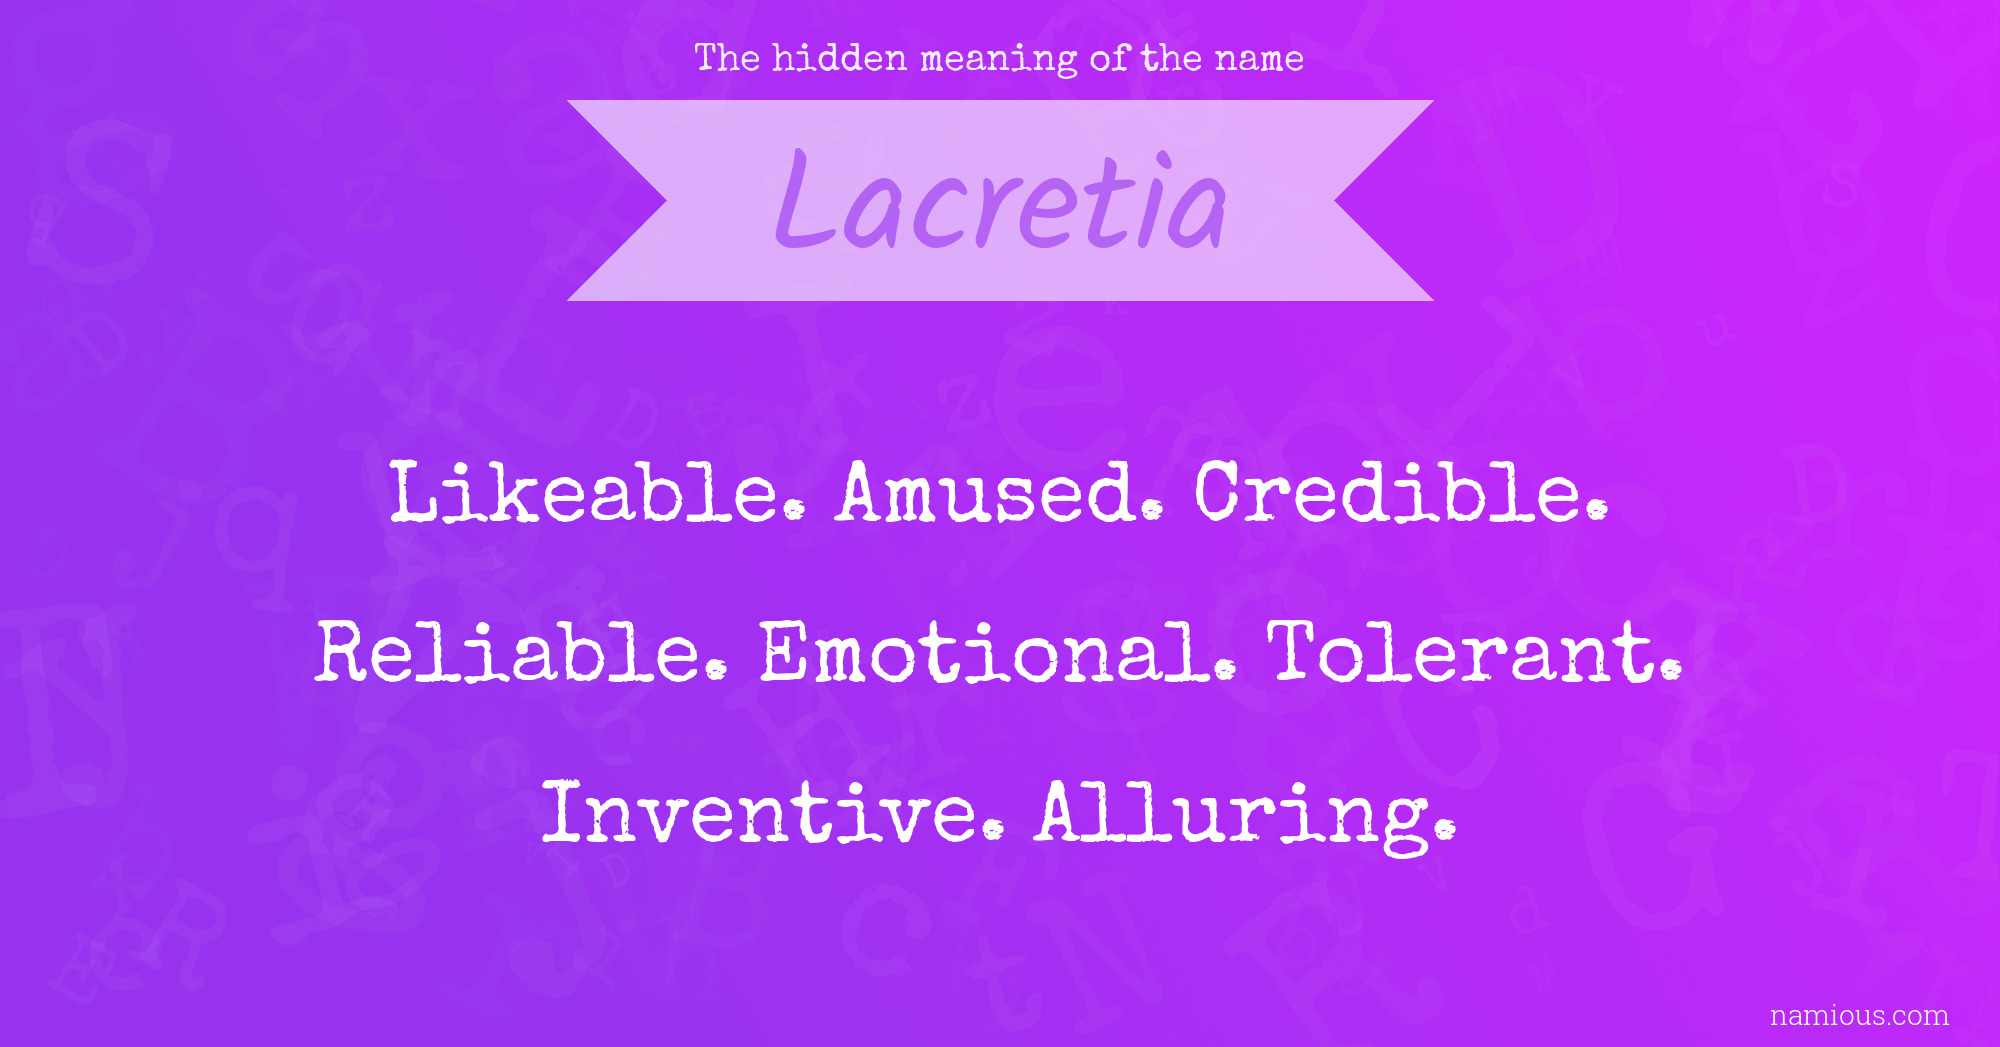 The hidden meaning of the name Lacretia